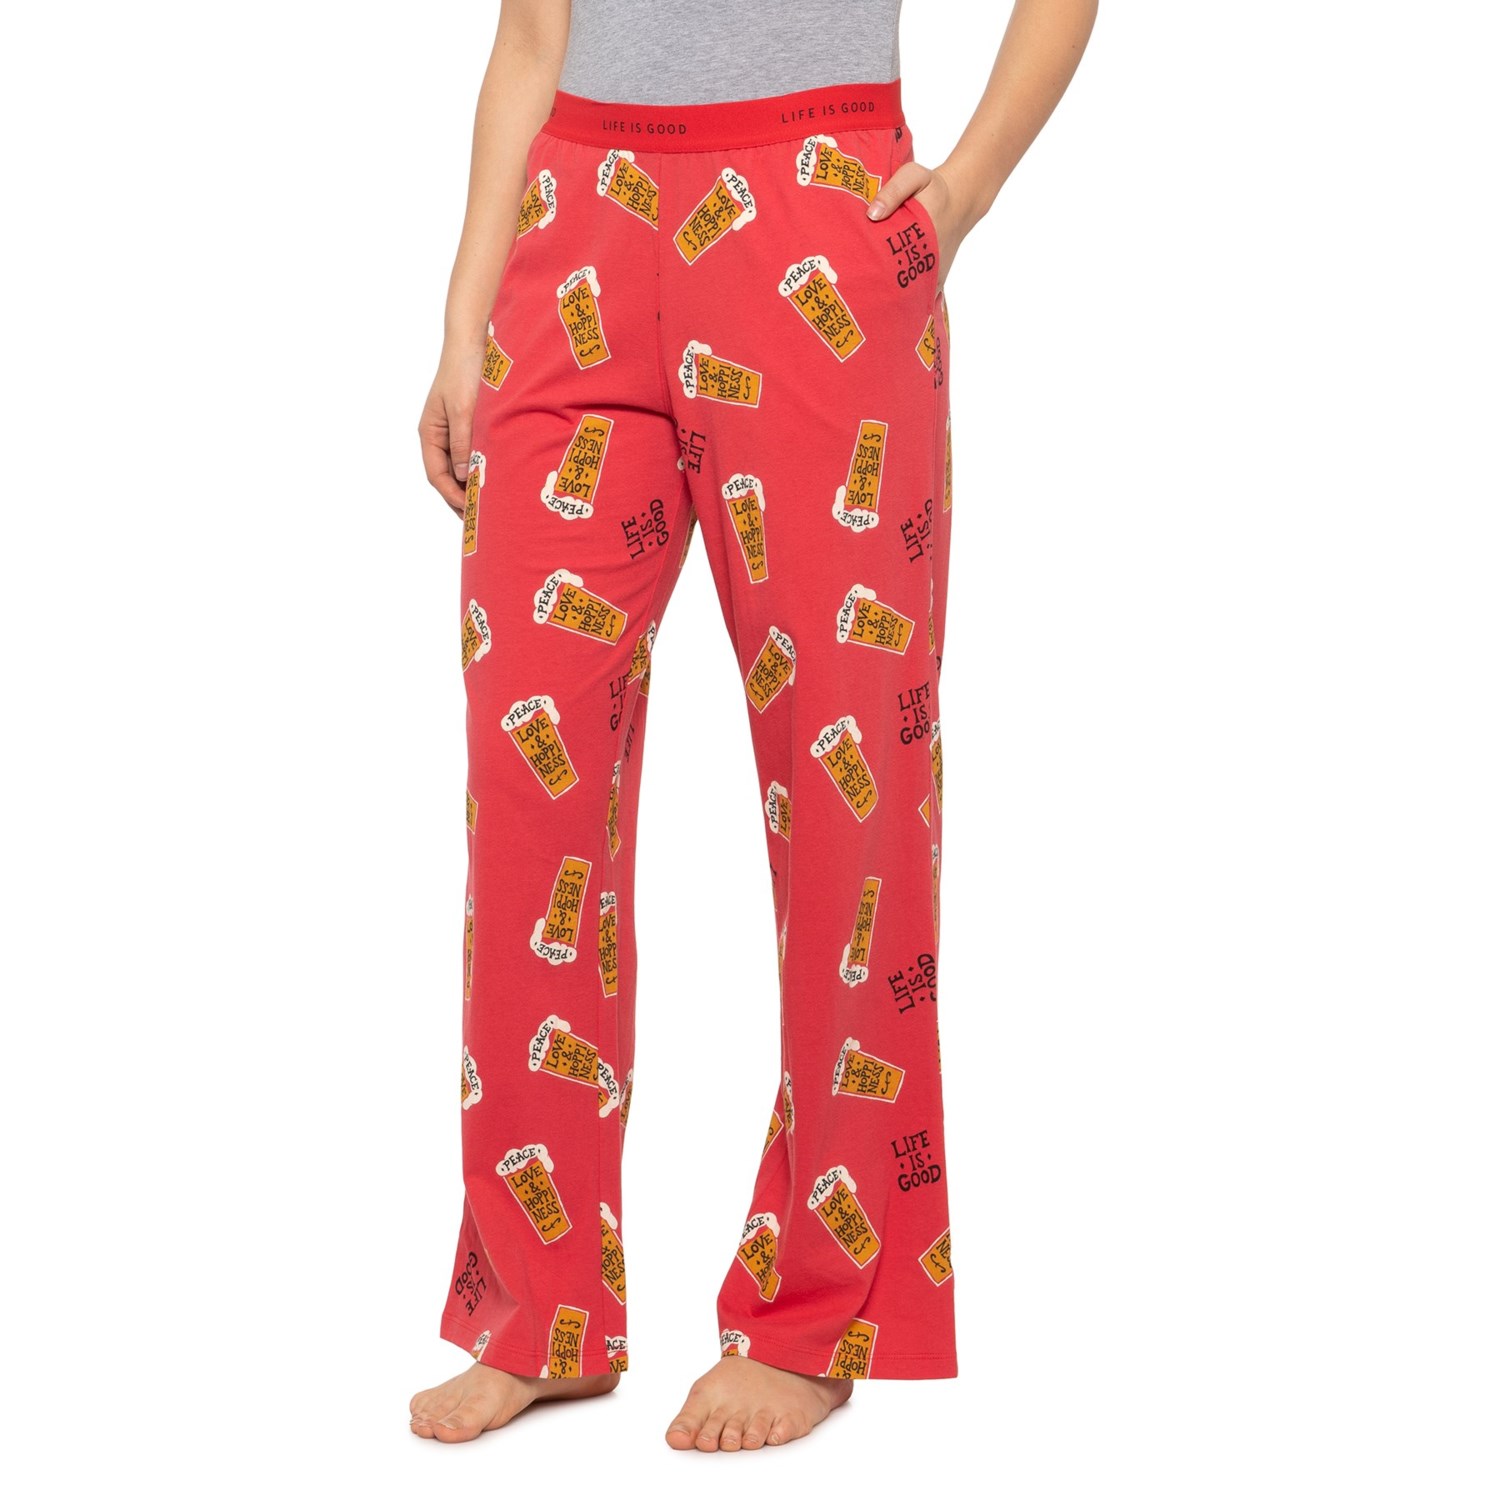 Life is good® Peace Love Hoppiness Pajama Pants (For Women) - Save 77%